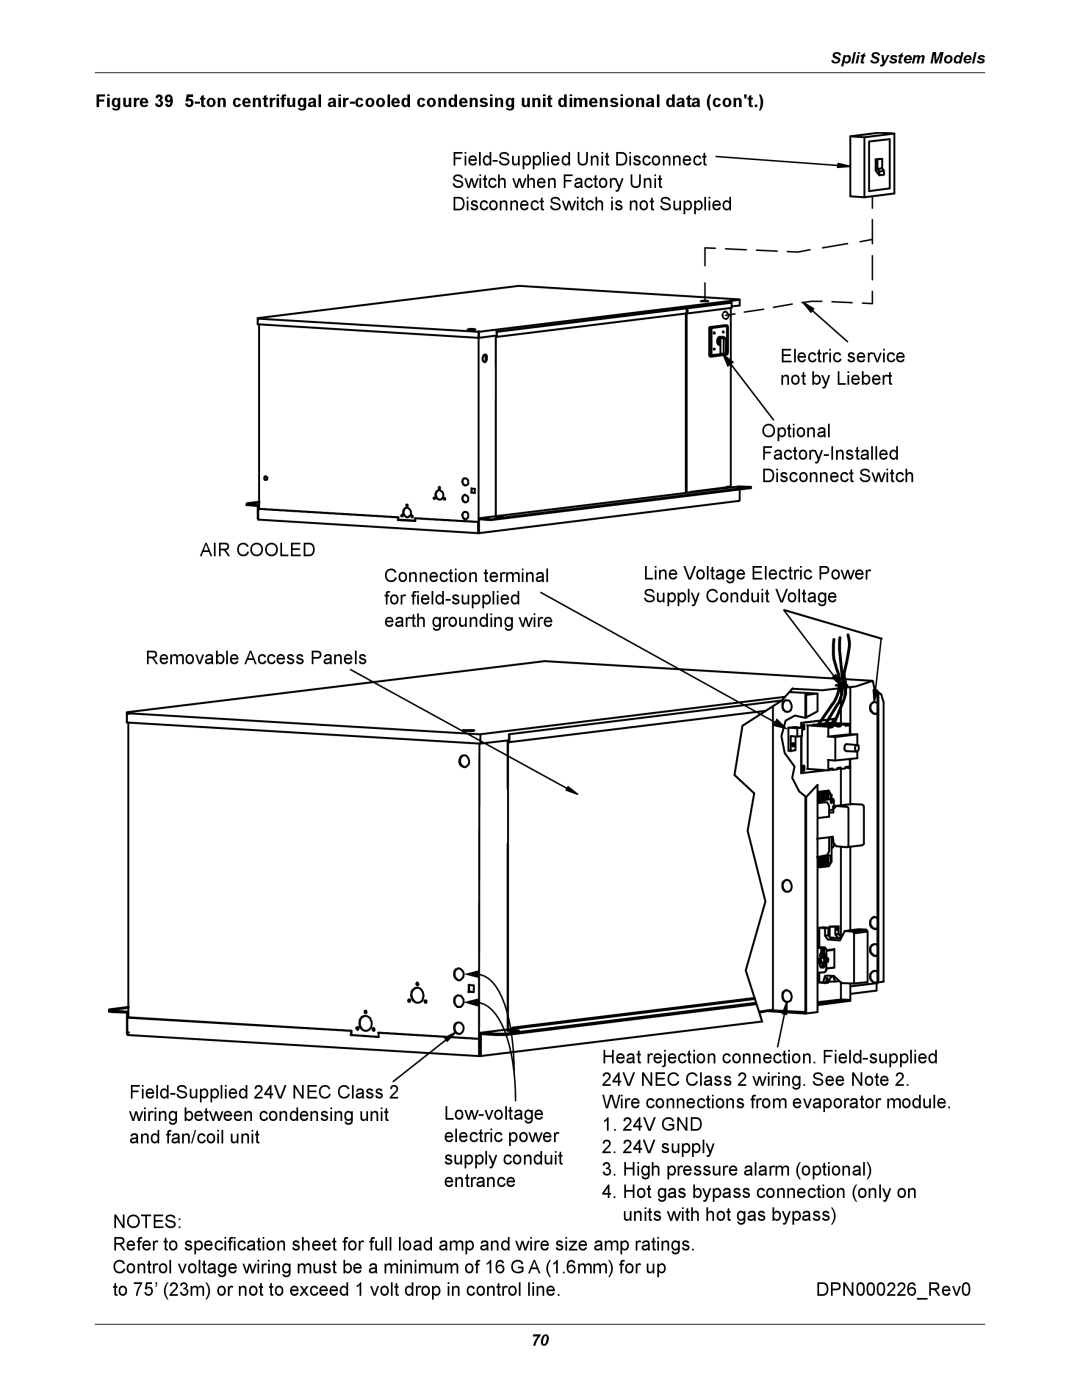 Emerson 3000 installation manual Air Cooled 